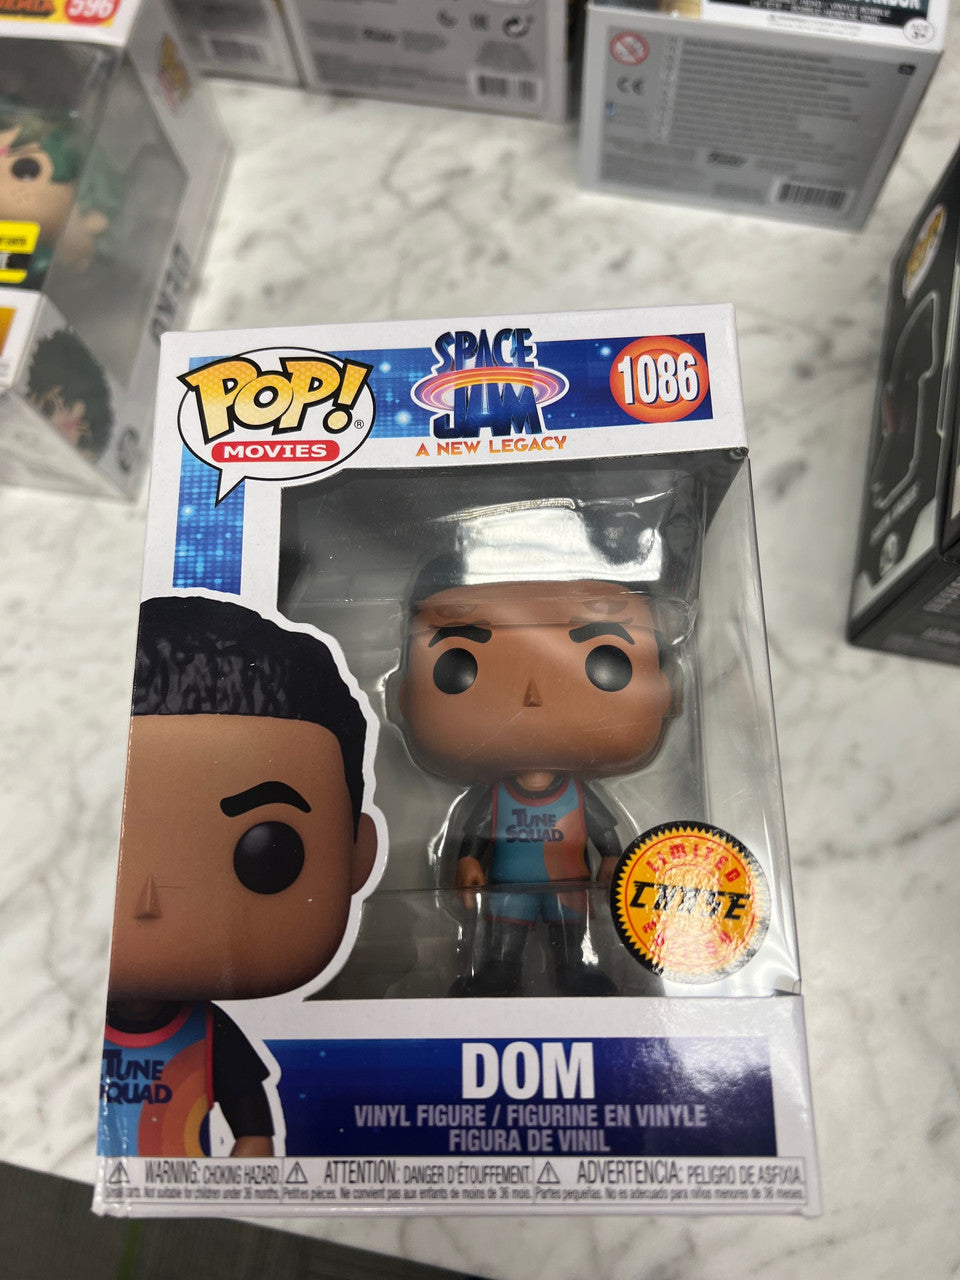 Dom Space Jam a New Legacy Chase Funko Pop figure 1086